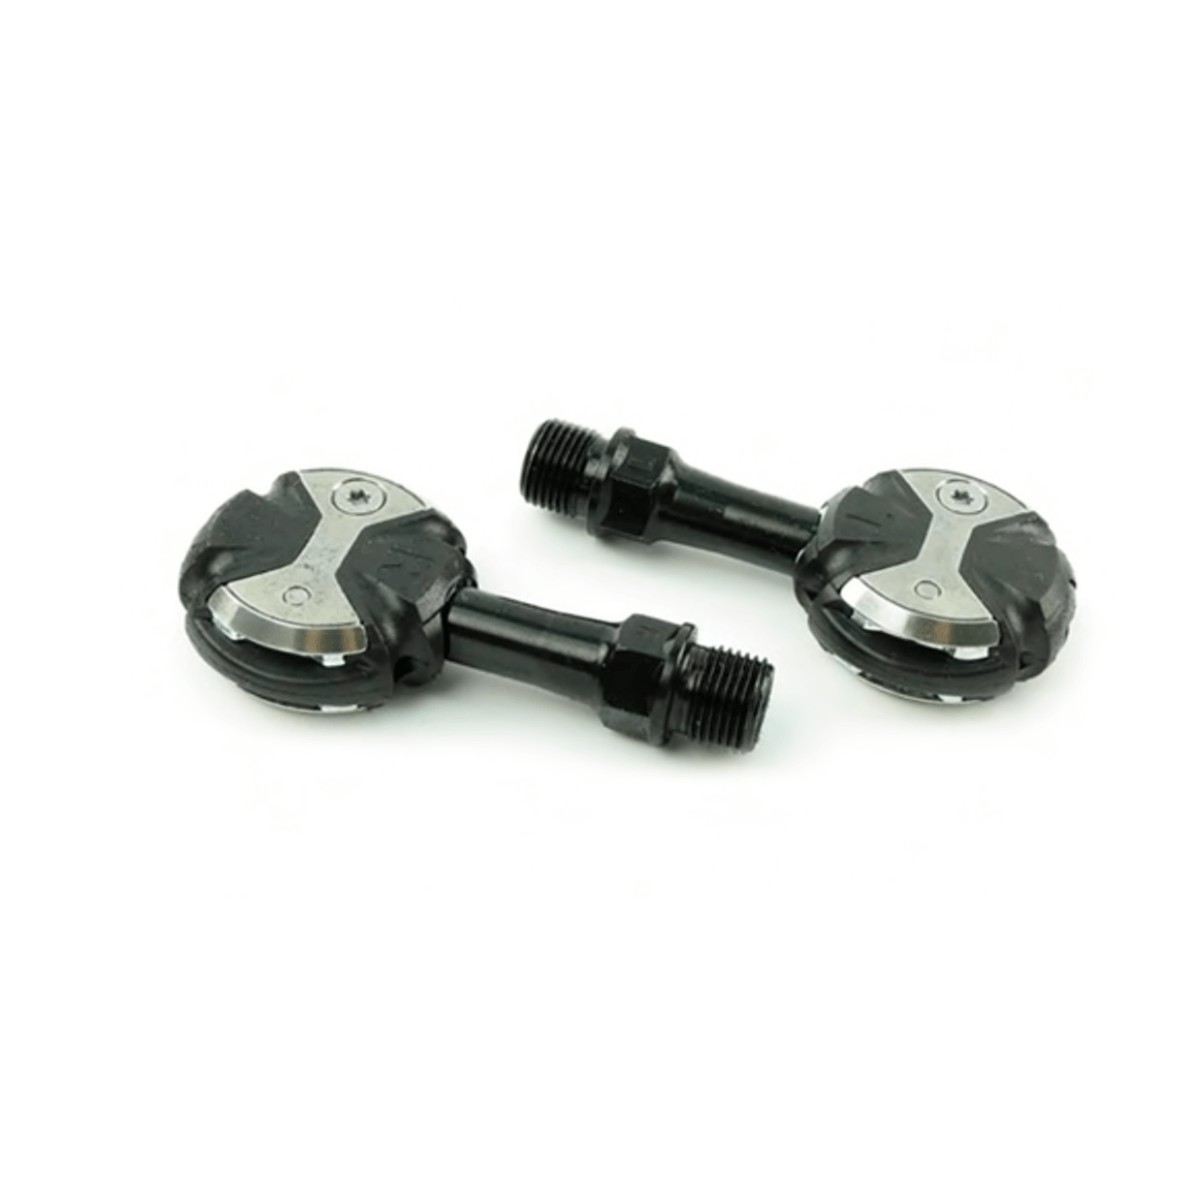 Speedplay Zero CroMoly Road Pedals With Walkable Cleats Black